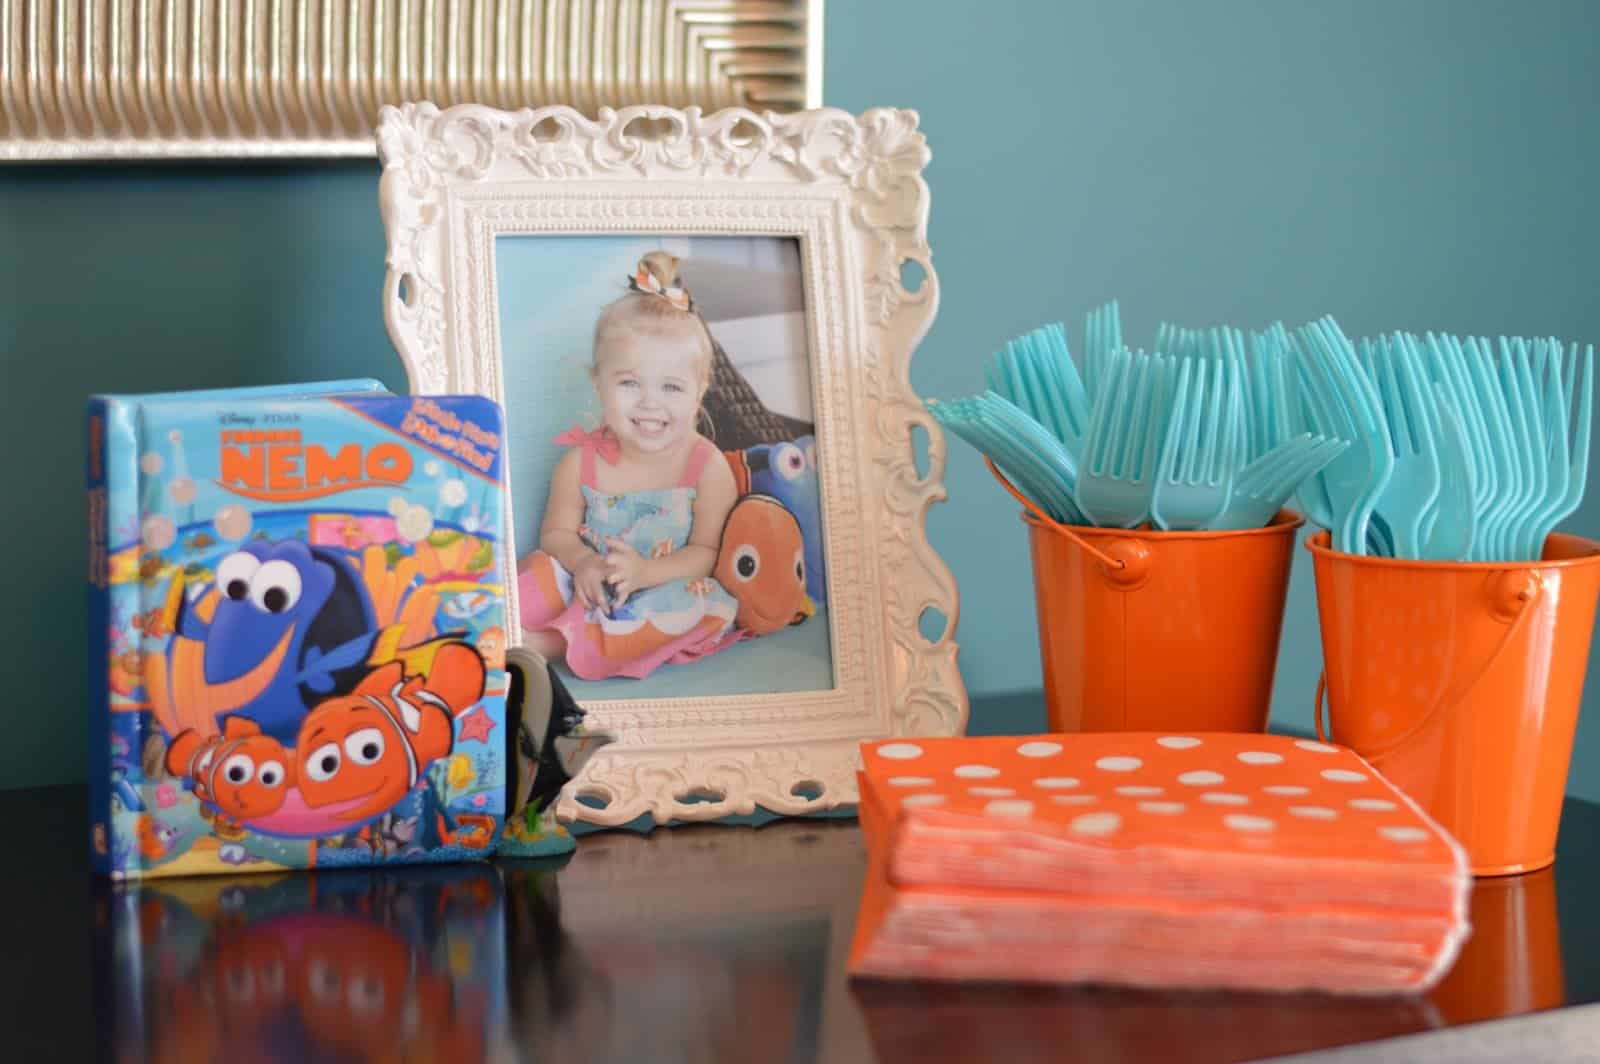 Finding Nemo Birthday Party Ideas: Food, Decor & More! - The Journey of  Parenthood